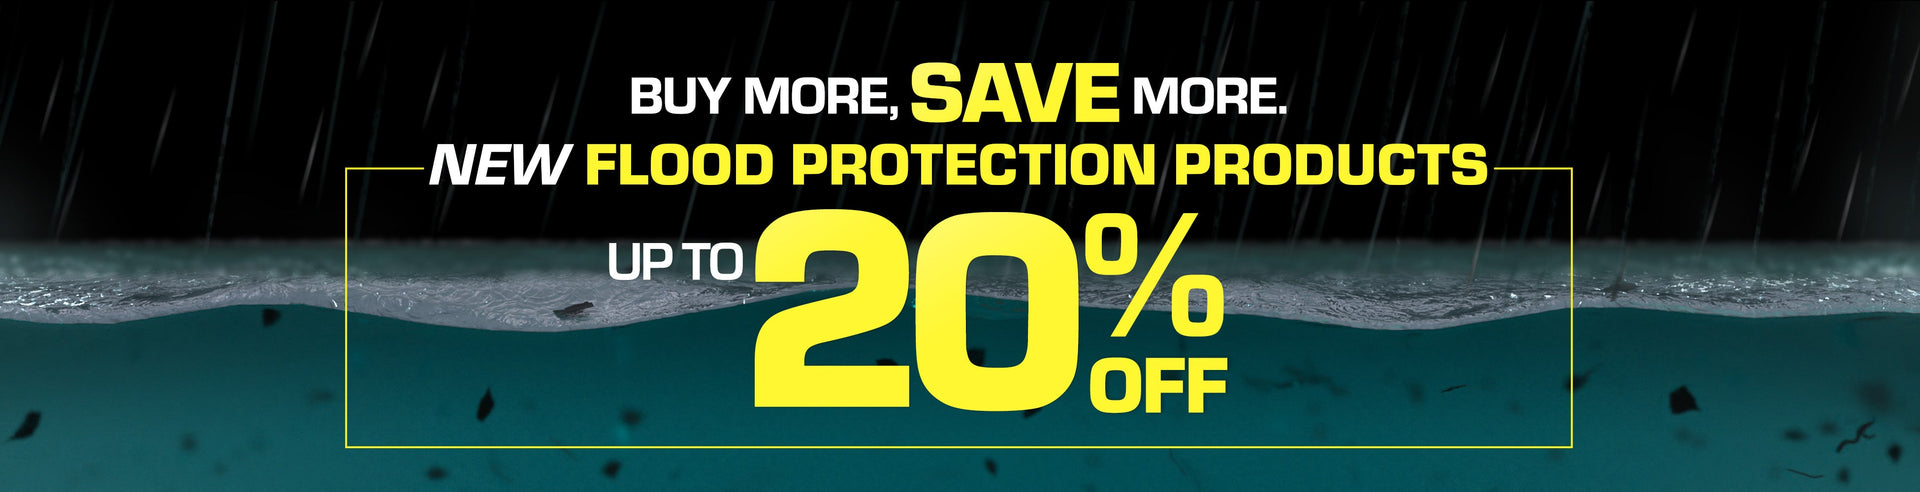 Buy More, Save More. New Flood Protection Products -- Up to 20% off.